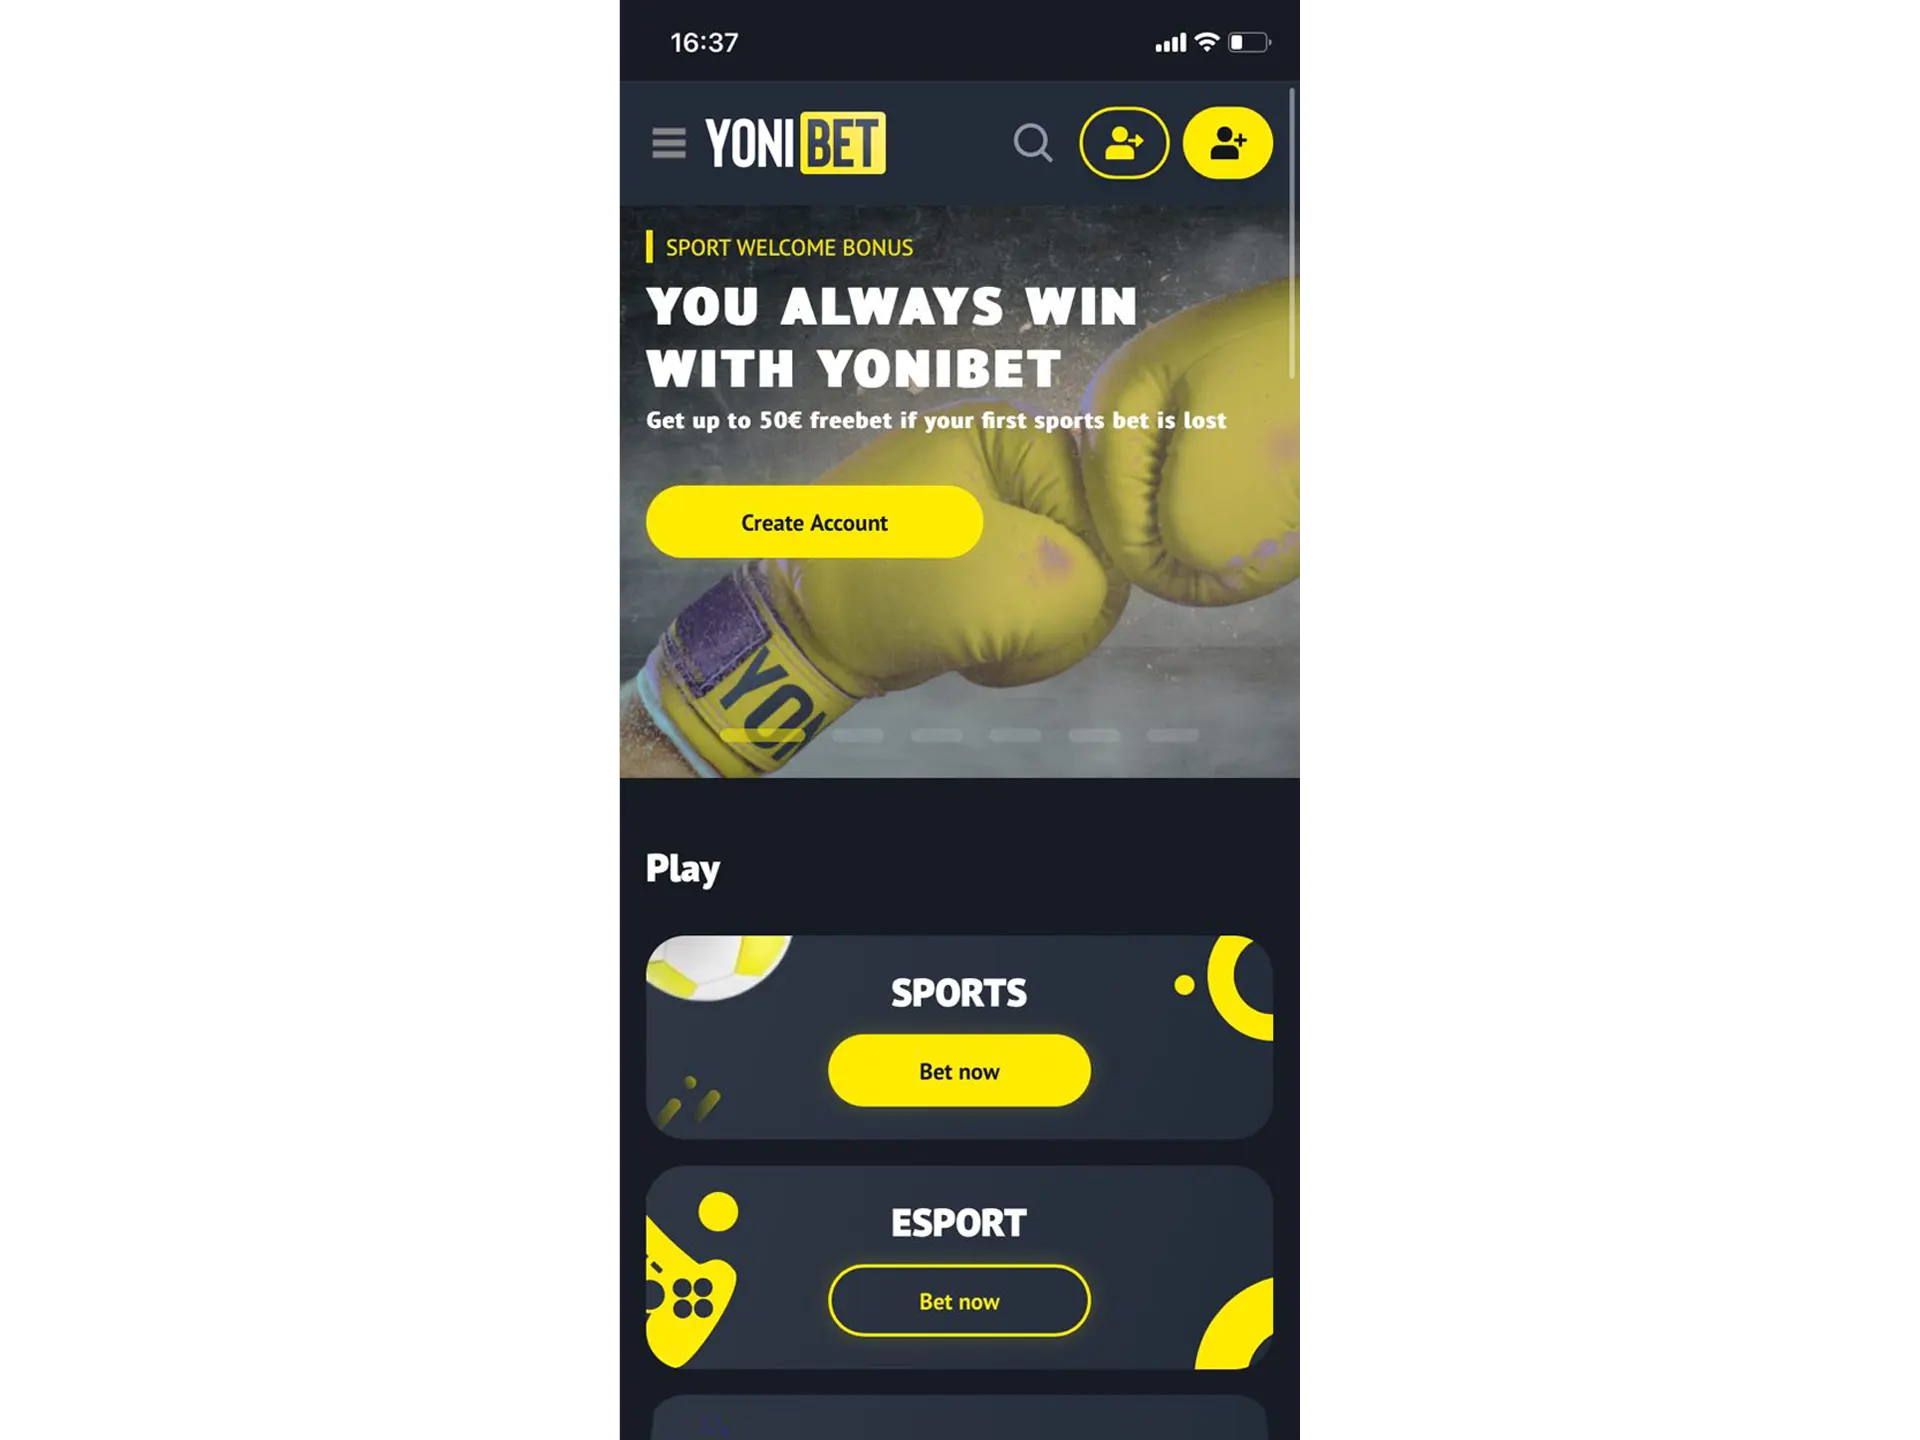 Congratulations, the Yonibet iOS app has been downloaded and set up successfully.